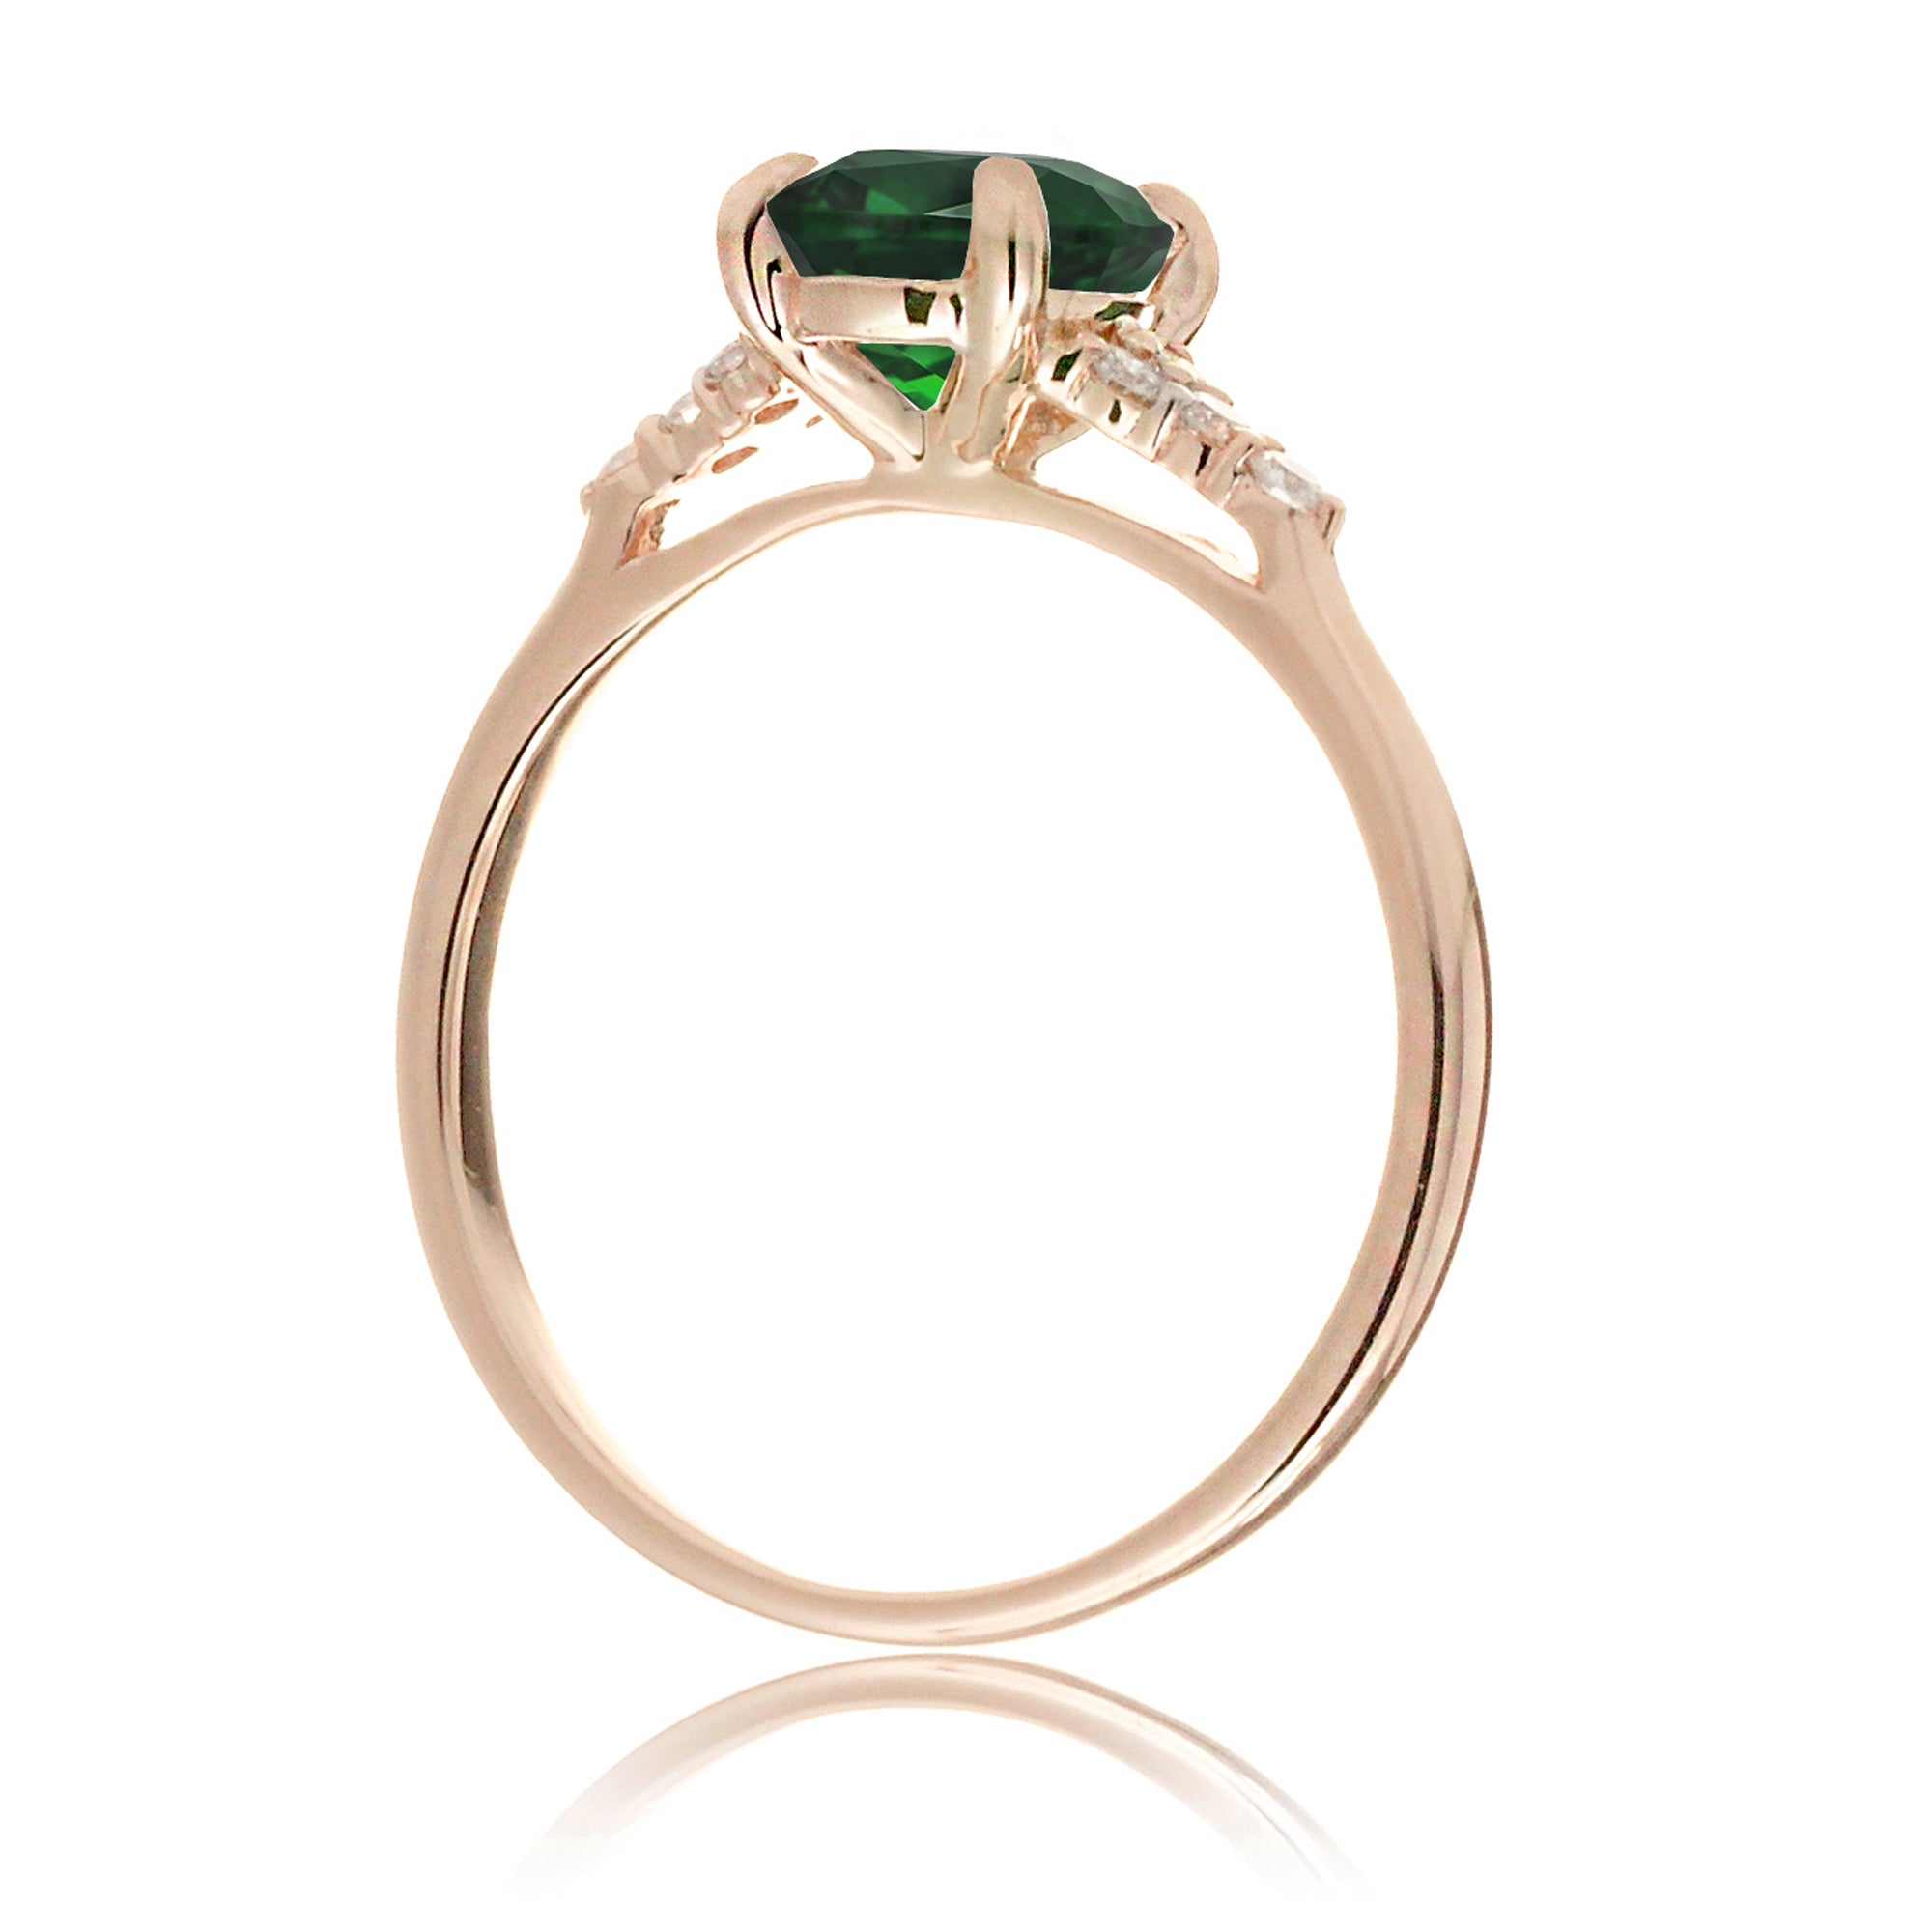 Pear cut emerald and diamond engagement ring in rose gold - the Chloe lab-grown